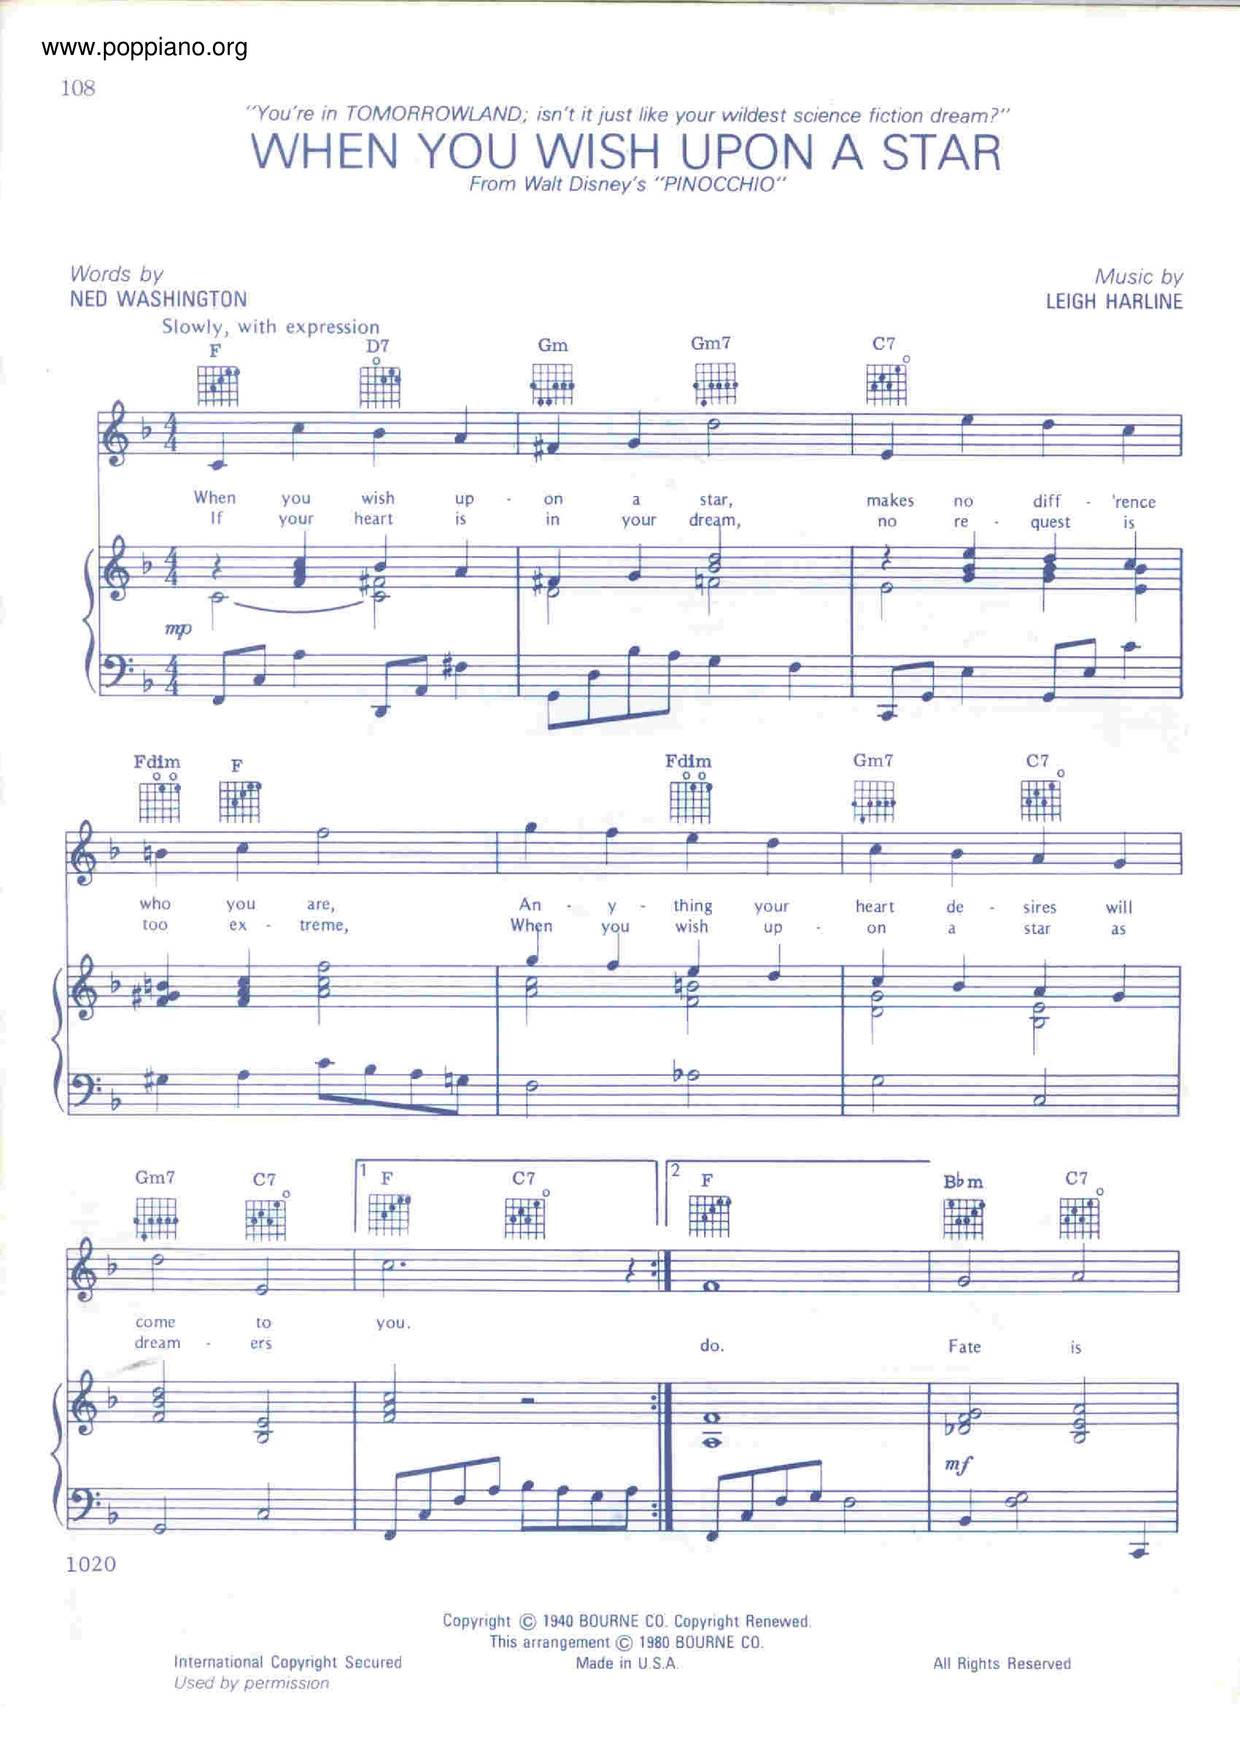 Movie Soundtrack Pinocchio When You Wish Upon A Star Sheet Music Pdf 星 に願いを 楽譜 ディズニー Free Score Download